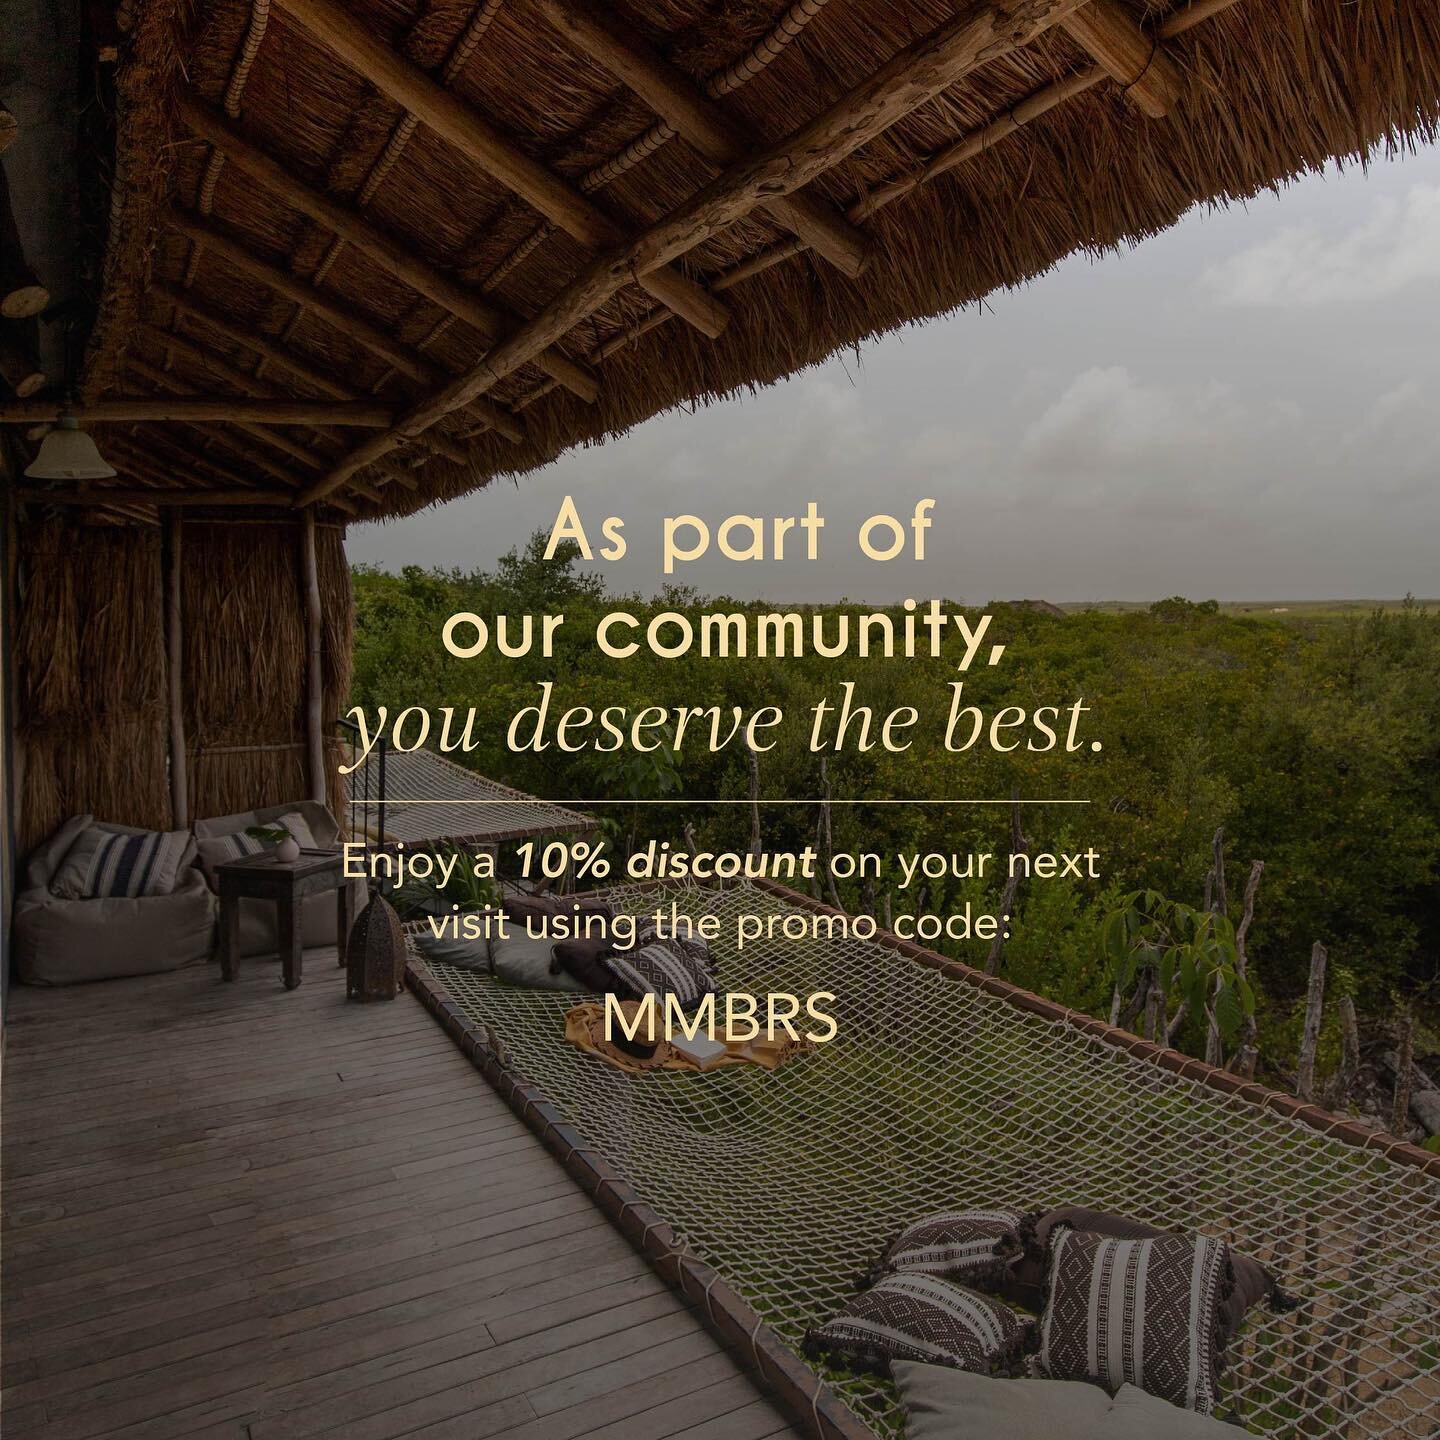 We&rsquo;re treating you to a 10% discount on all direct Radhoo bookings with the code: MMBRS (for bookings through December 17th, 2022 &amp; January 11th to April 30th, 2023) 

You deserve it, just like that, for being part of our jungle family! Com